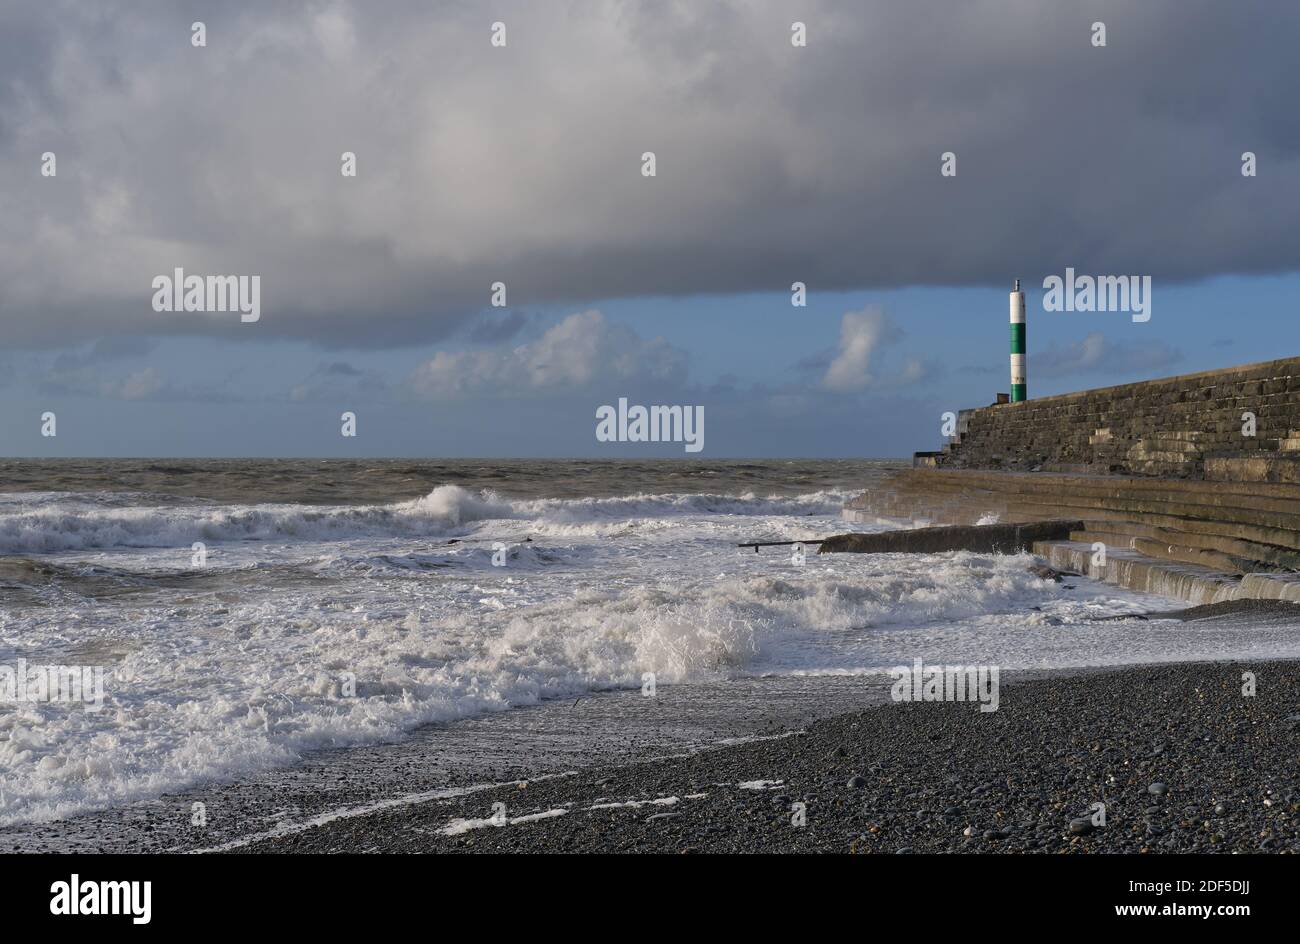 waves breaking on shore on a stormy day Stock Photo